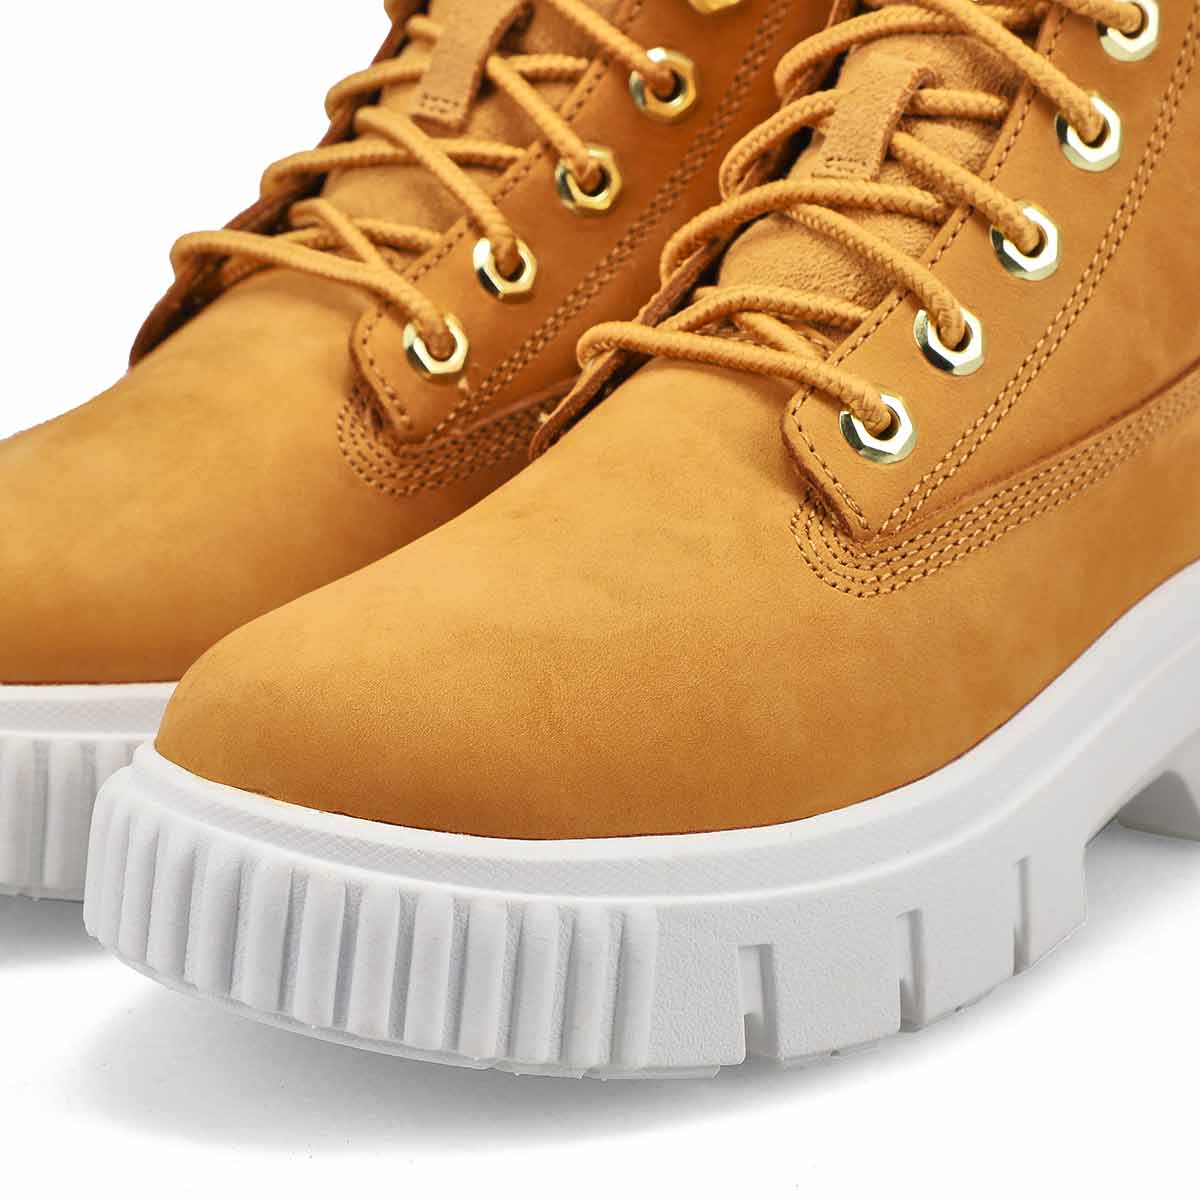 Timberland Women's Greyfield Lace Up Boot - W | SoftMoc.com